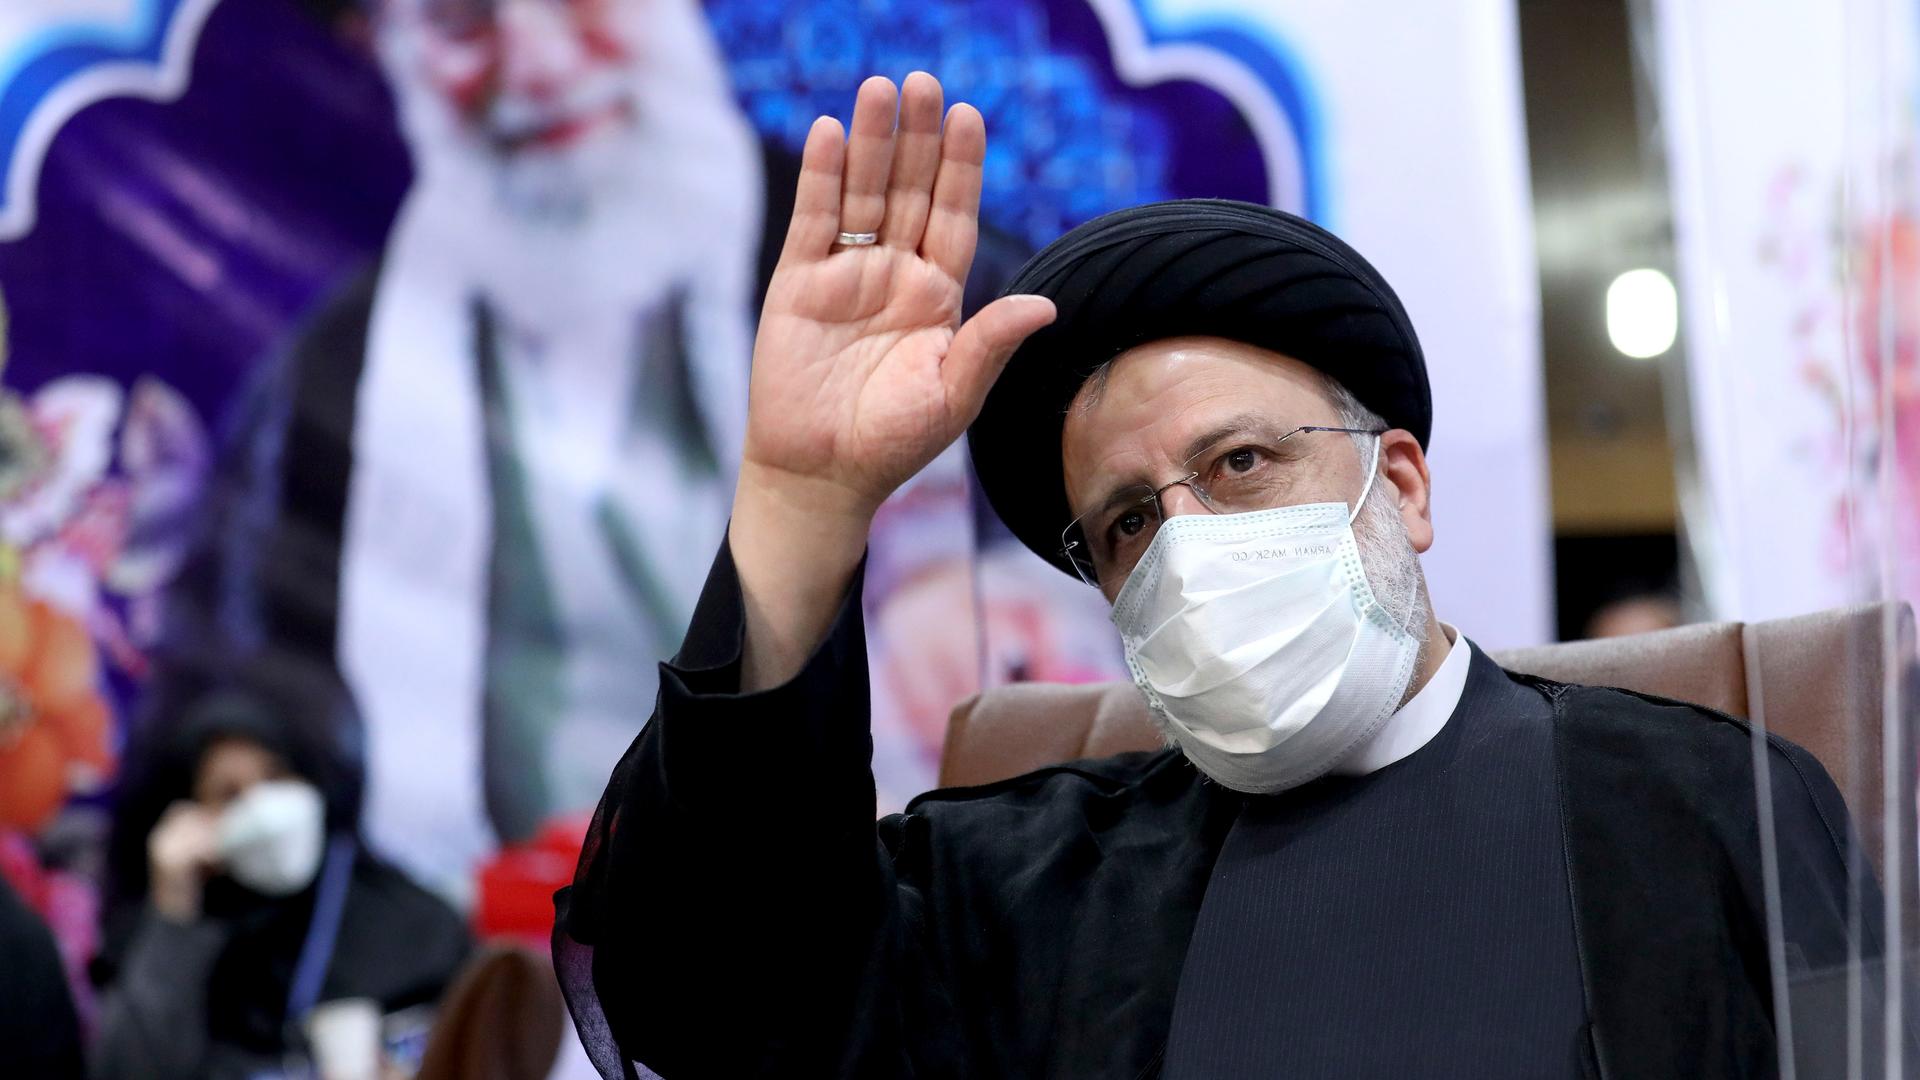 Iranian man in black robe and turban waves in front of a picture of Supreme Leader Ali Khamenei